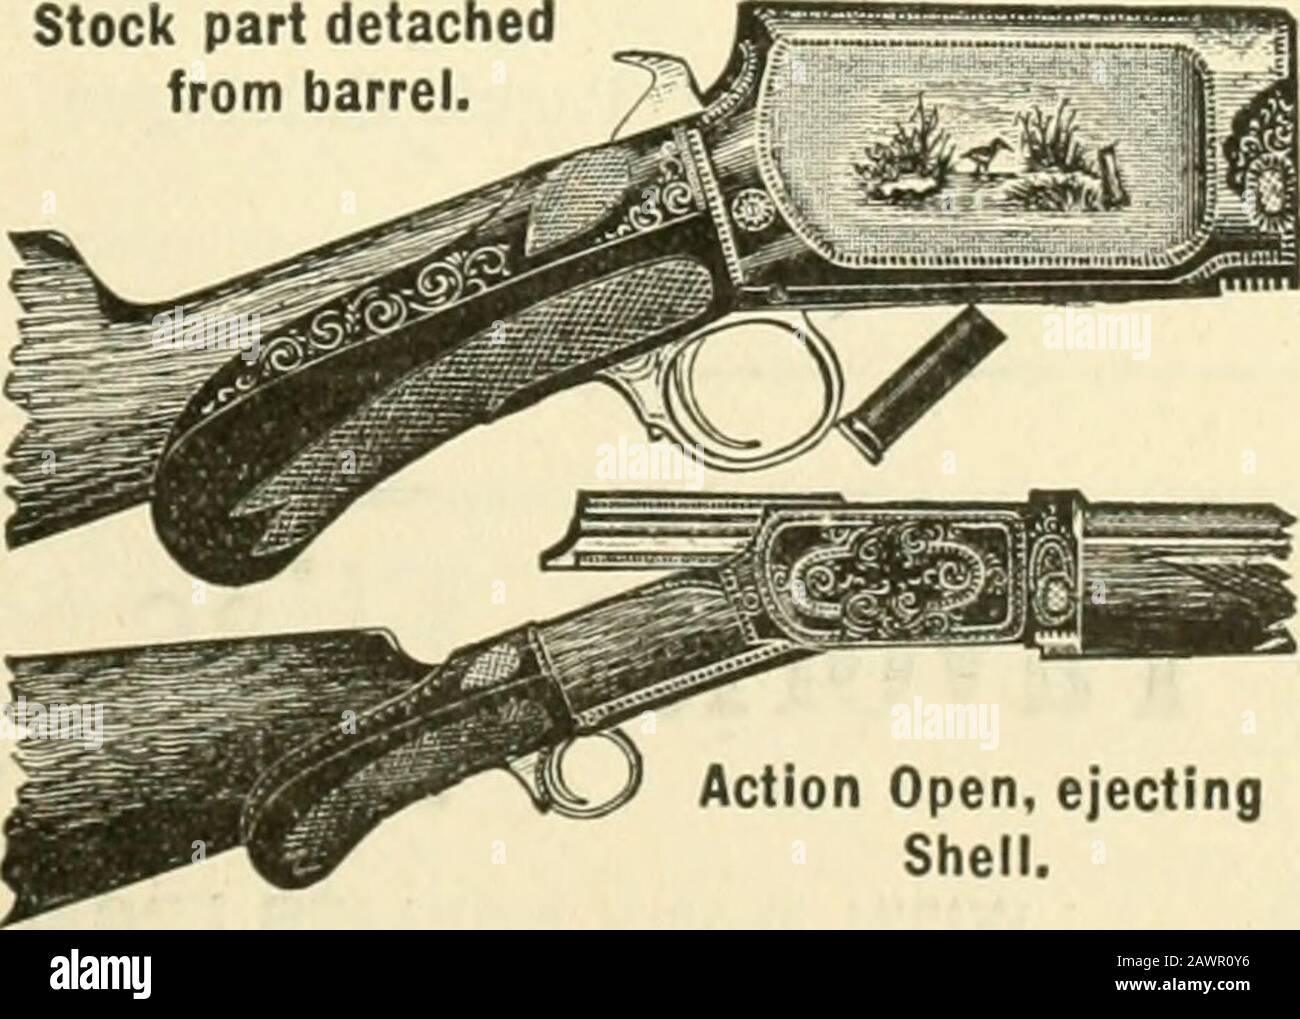 The American angler . nSHINGTACKLE&^^ ^ OUTING SUPPLIESfij BOTTOM Pf^ I CE.SSend Stamp for.Cat sonC0.85RandolphS:Ch!cago. stock part detachedfrom barrel.. Action Open, ejectingShell. THE it BURGESS GUN 12 ga. Repeating Shot-Gun. Latest, Quickest, Simplest, Safest. The ideal artion. Movement in direct line betweenpoints of support. Double hits in IS second ; three hitsin one second ; six hits lu less than three seconds. Address tor circulars, BURGESS GUN CO., Buffalo, N. Y. IV American Ansfler Advertiser Tfie Tarpon or Silver King (ILLUSTRATED.) v^(w^^^9^^^&^9^^^^ oooooooooooo Stock Photo